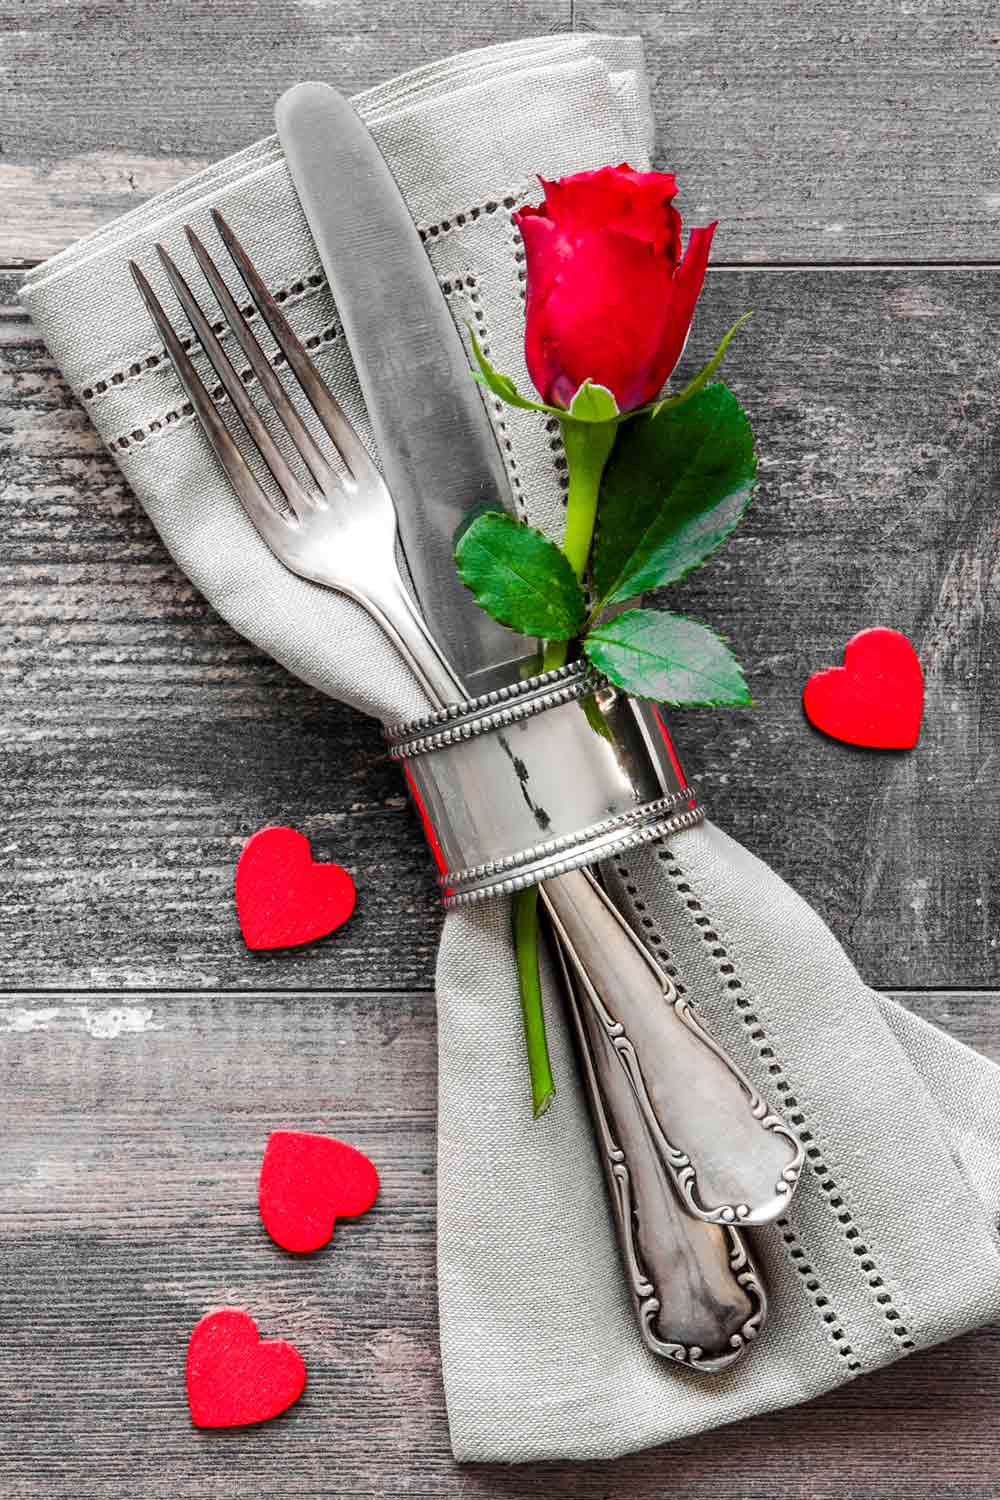 Silver Colored Napkin Ring for Valentine's Day Evening Table